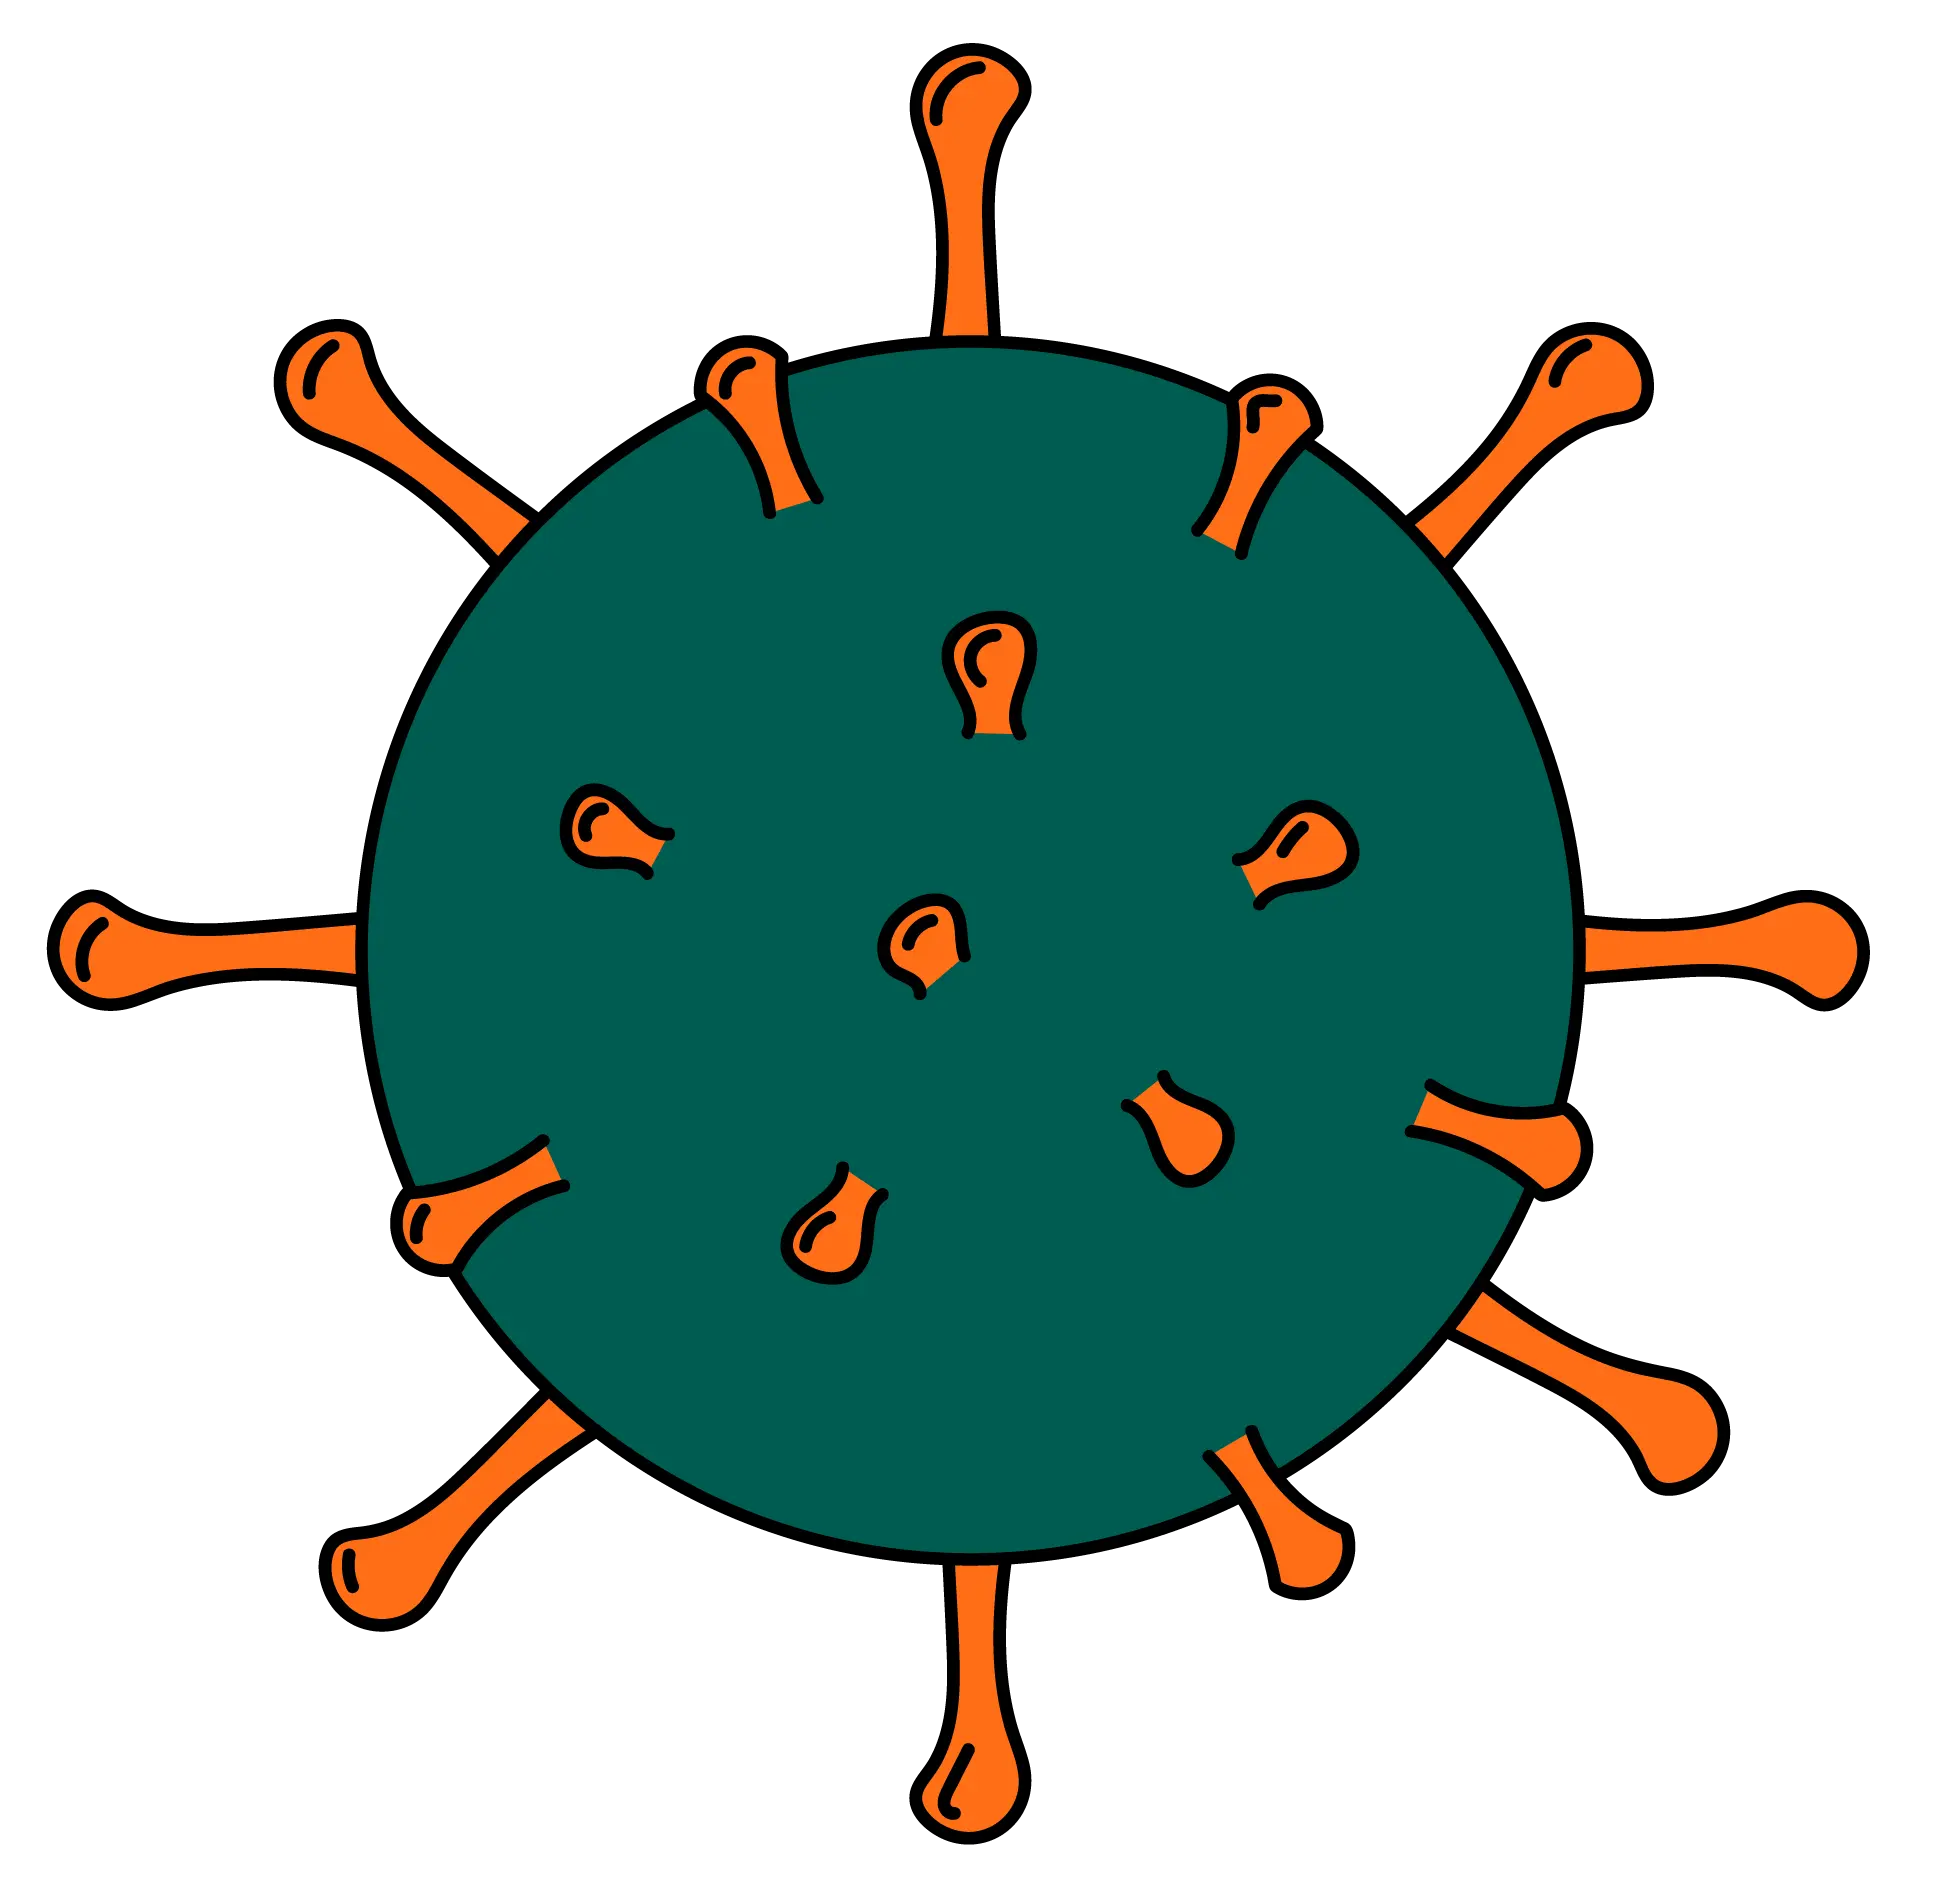 Coronaviruses are named after the crown-like spikes that protrude from their surface.